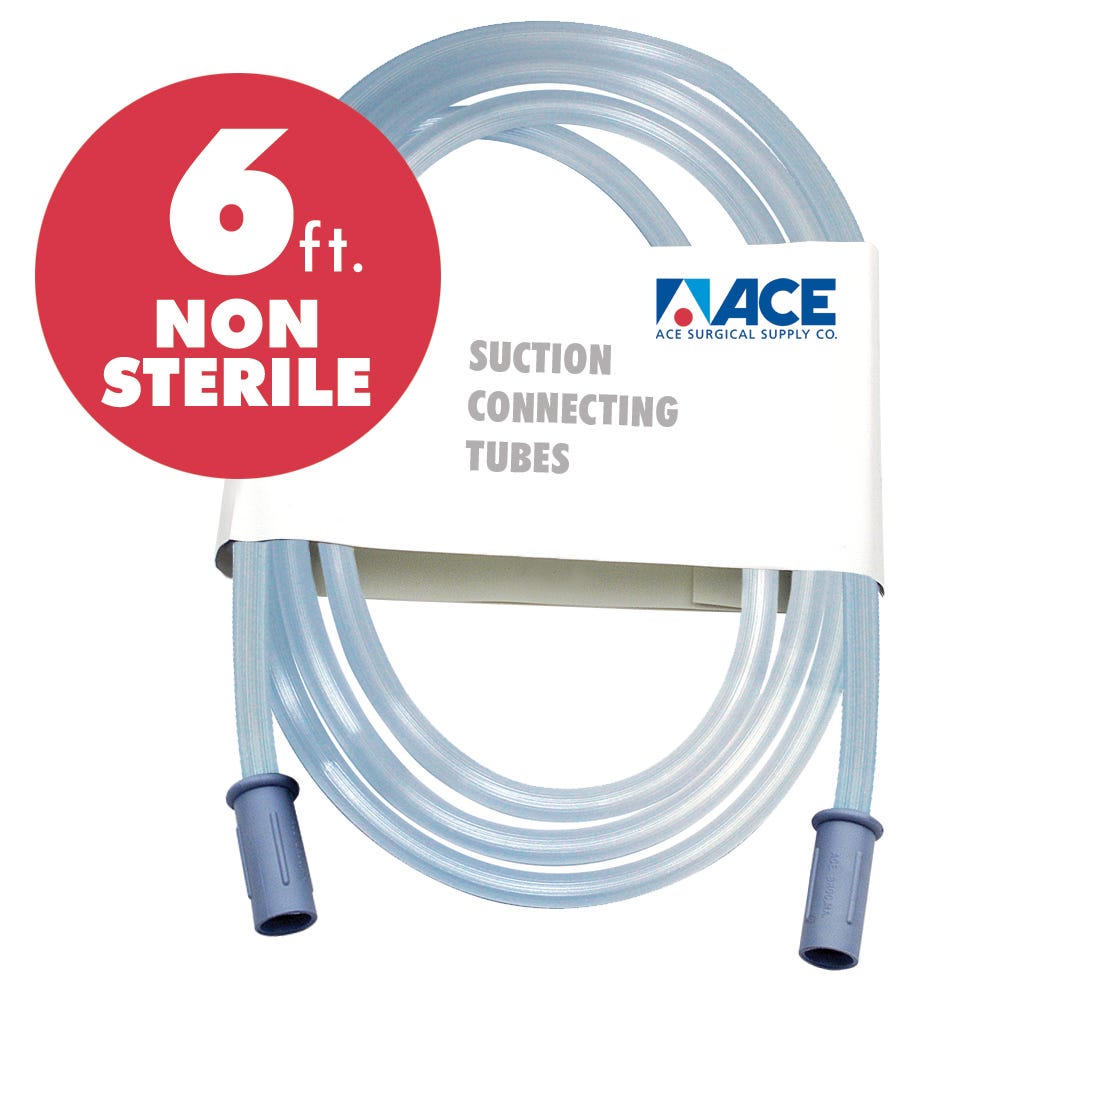 ACE Suction Connection Tubing NS - Clear with Blue Tint, 6' long , 1/4" I.D. - 25/Case